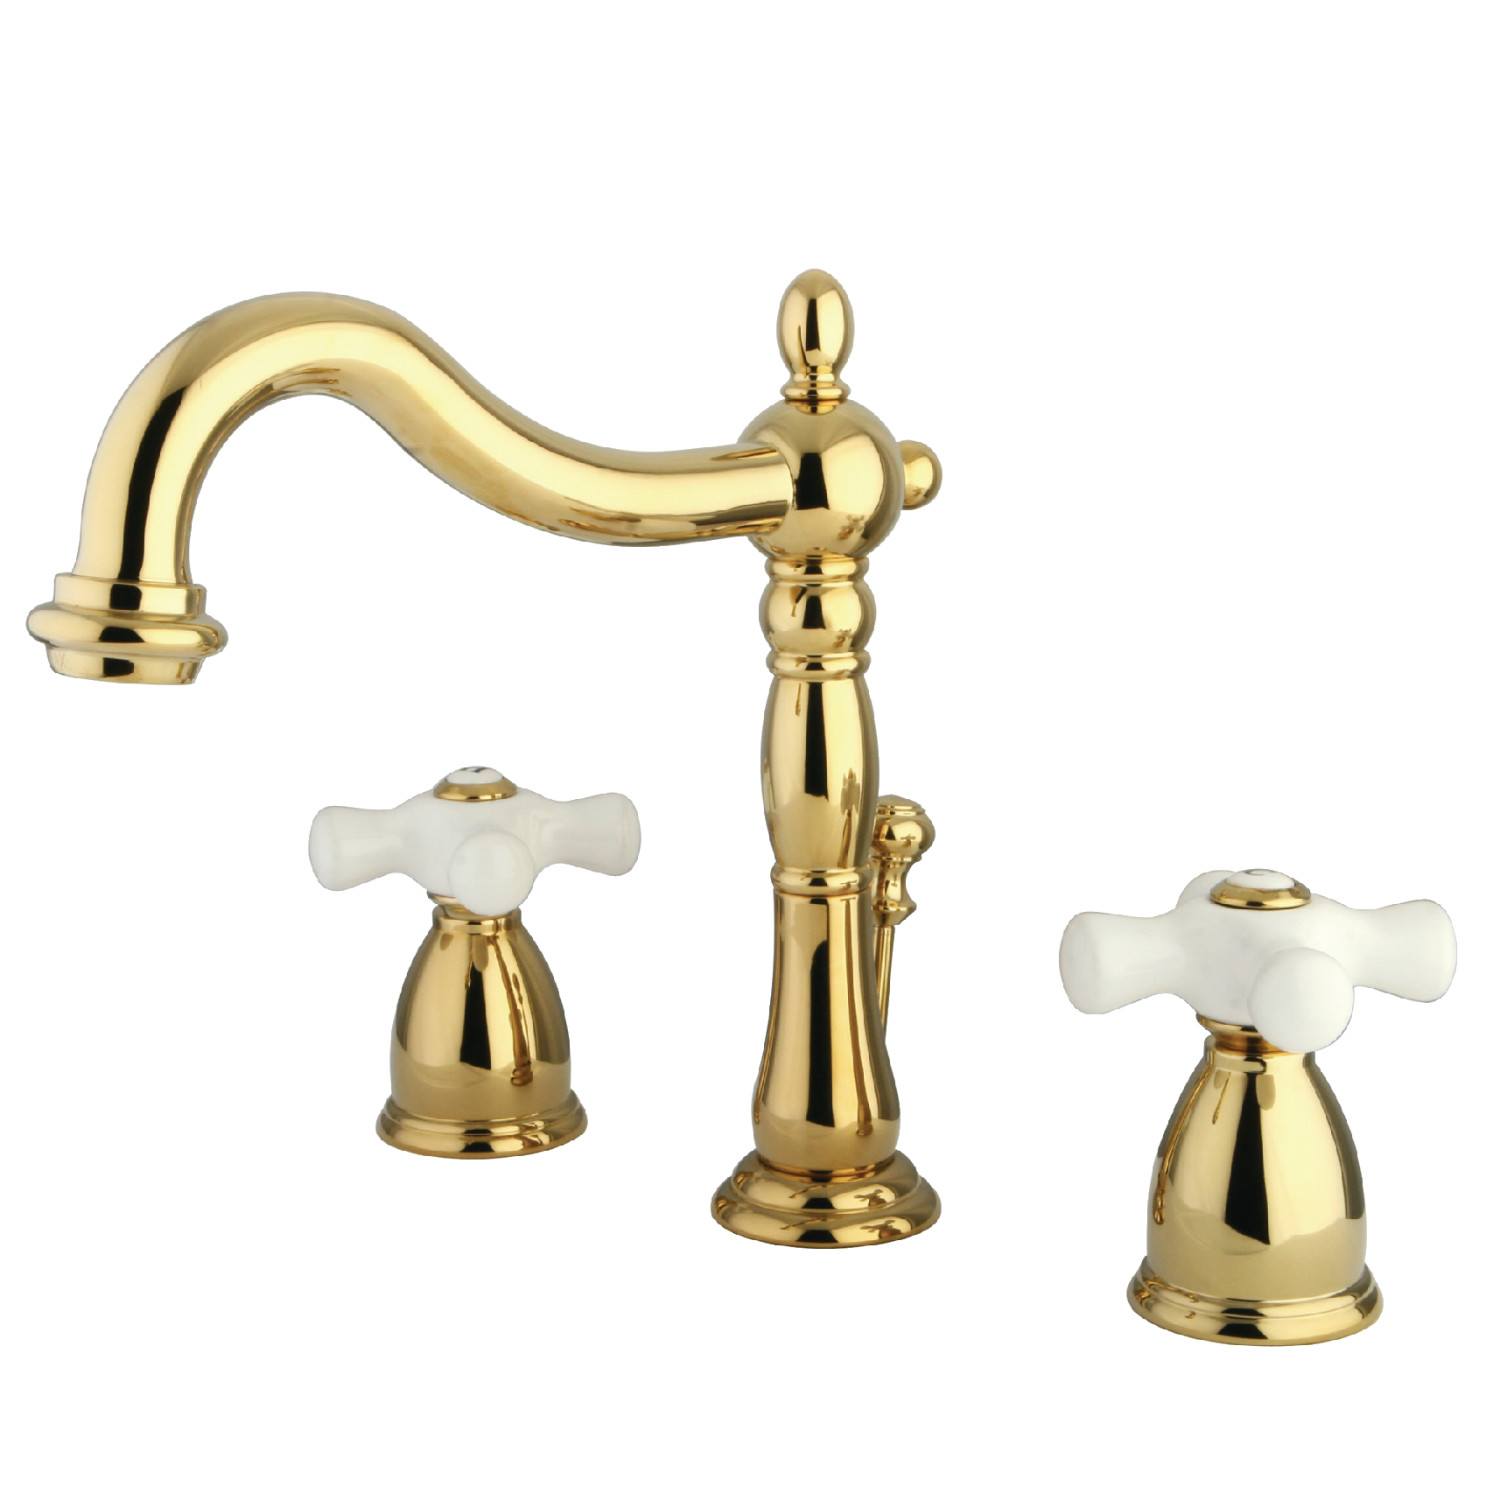 Derengge F-8303-PB Gold Finish 8” Widespread Two Handle Bathroom Faucet 